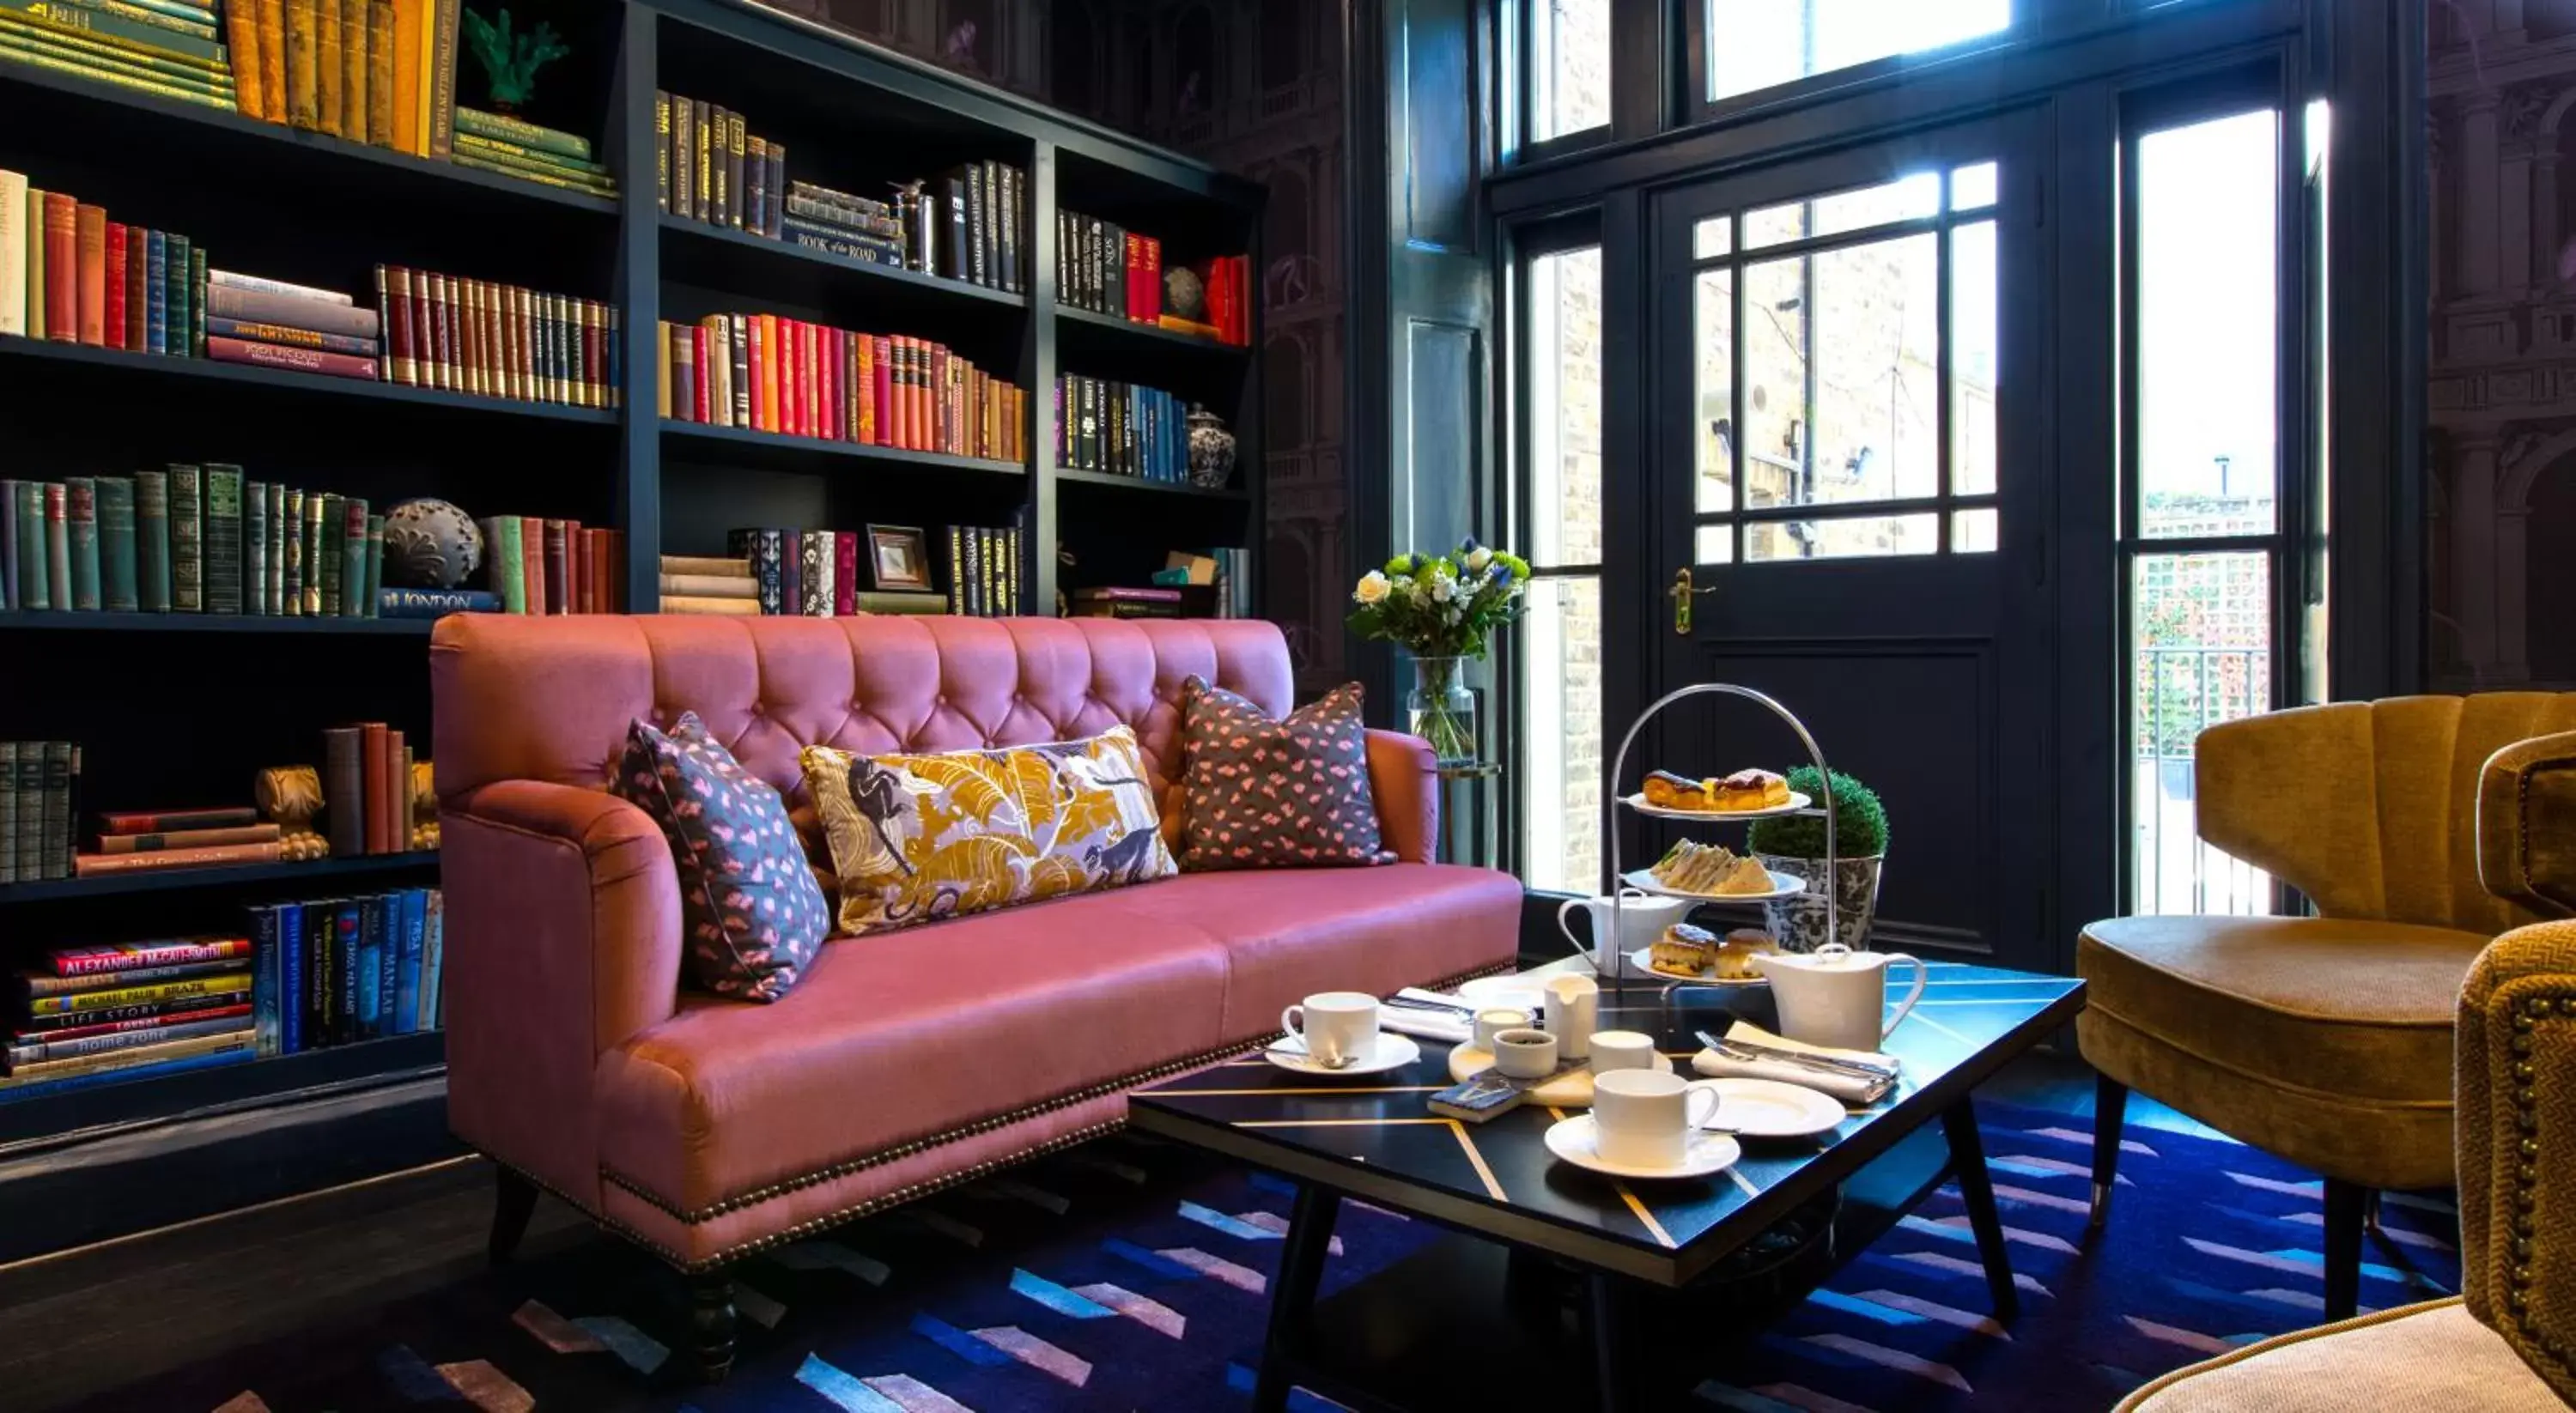 Library in The Academy - Small Luxury Hotels of the World